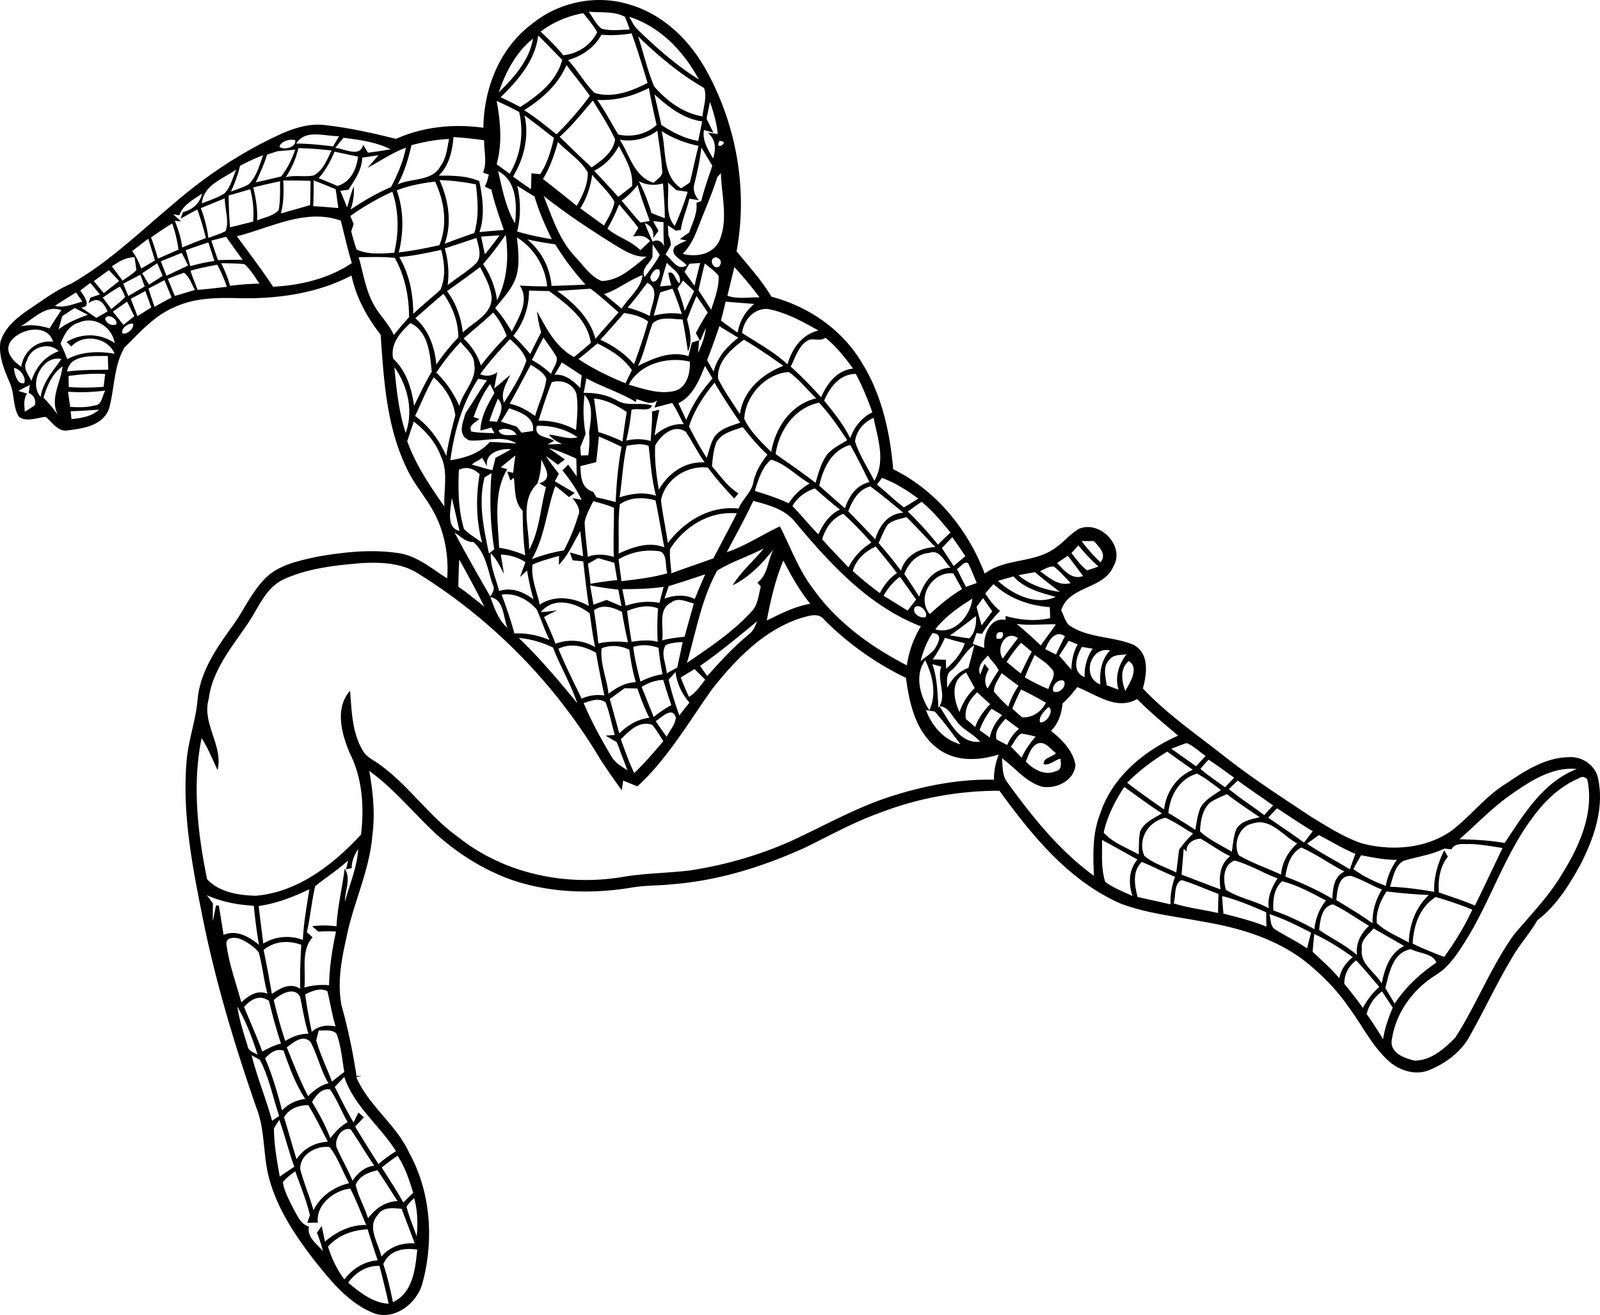 Superhero Coloring Pages Spider-Man | coloring pages for ...